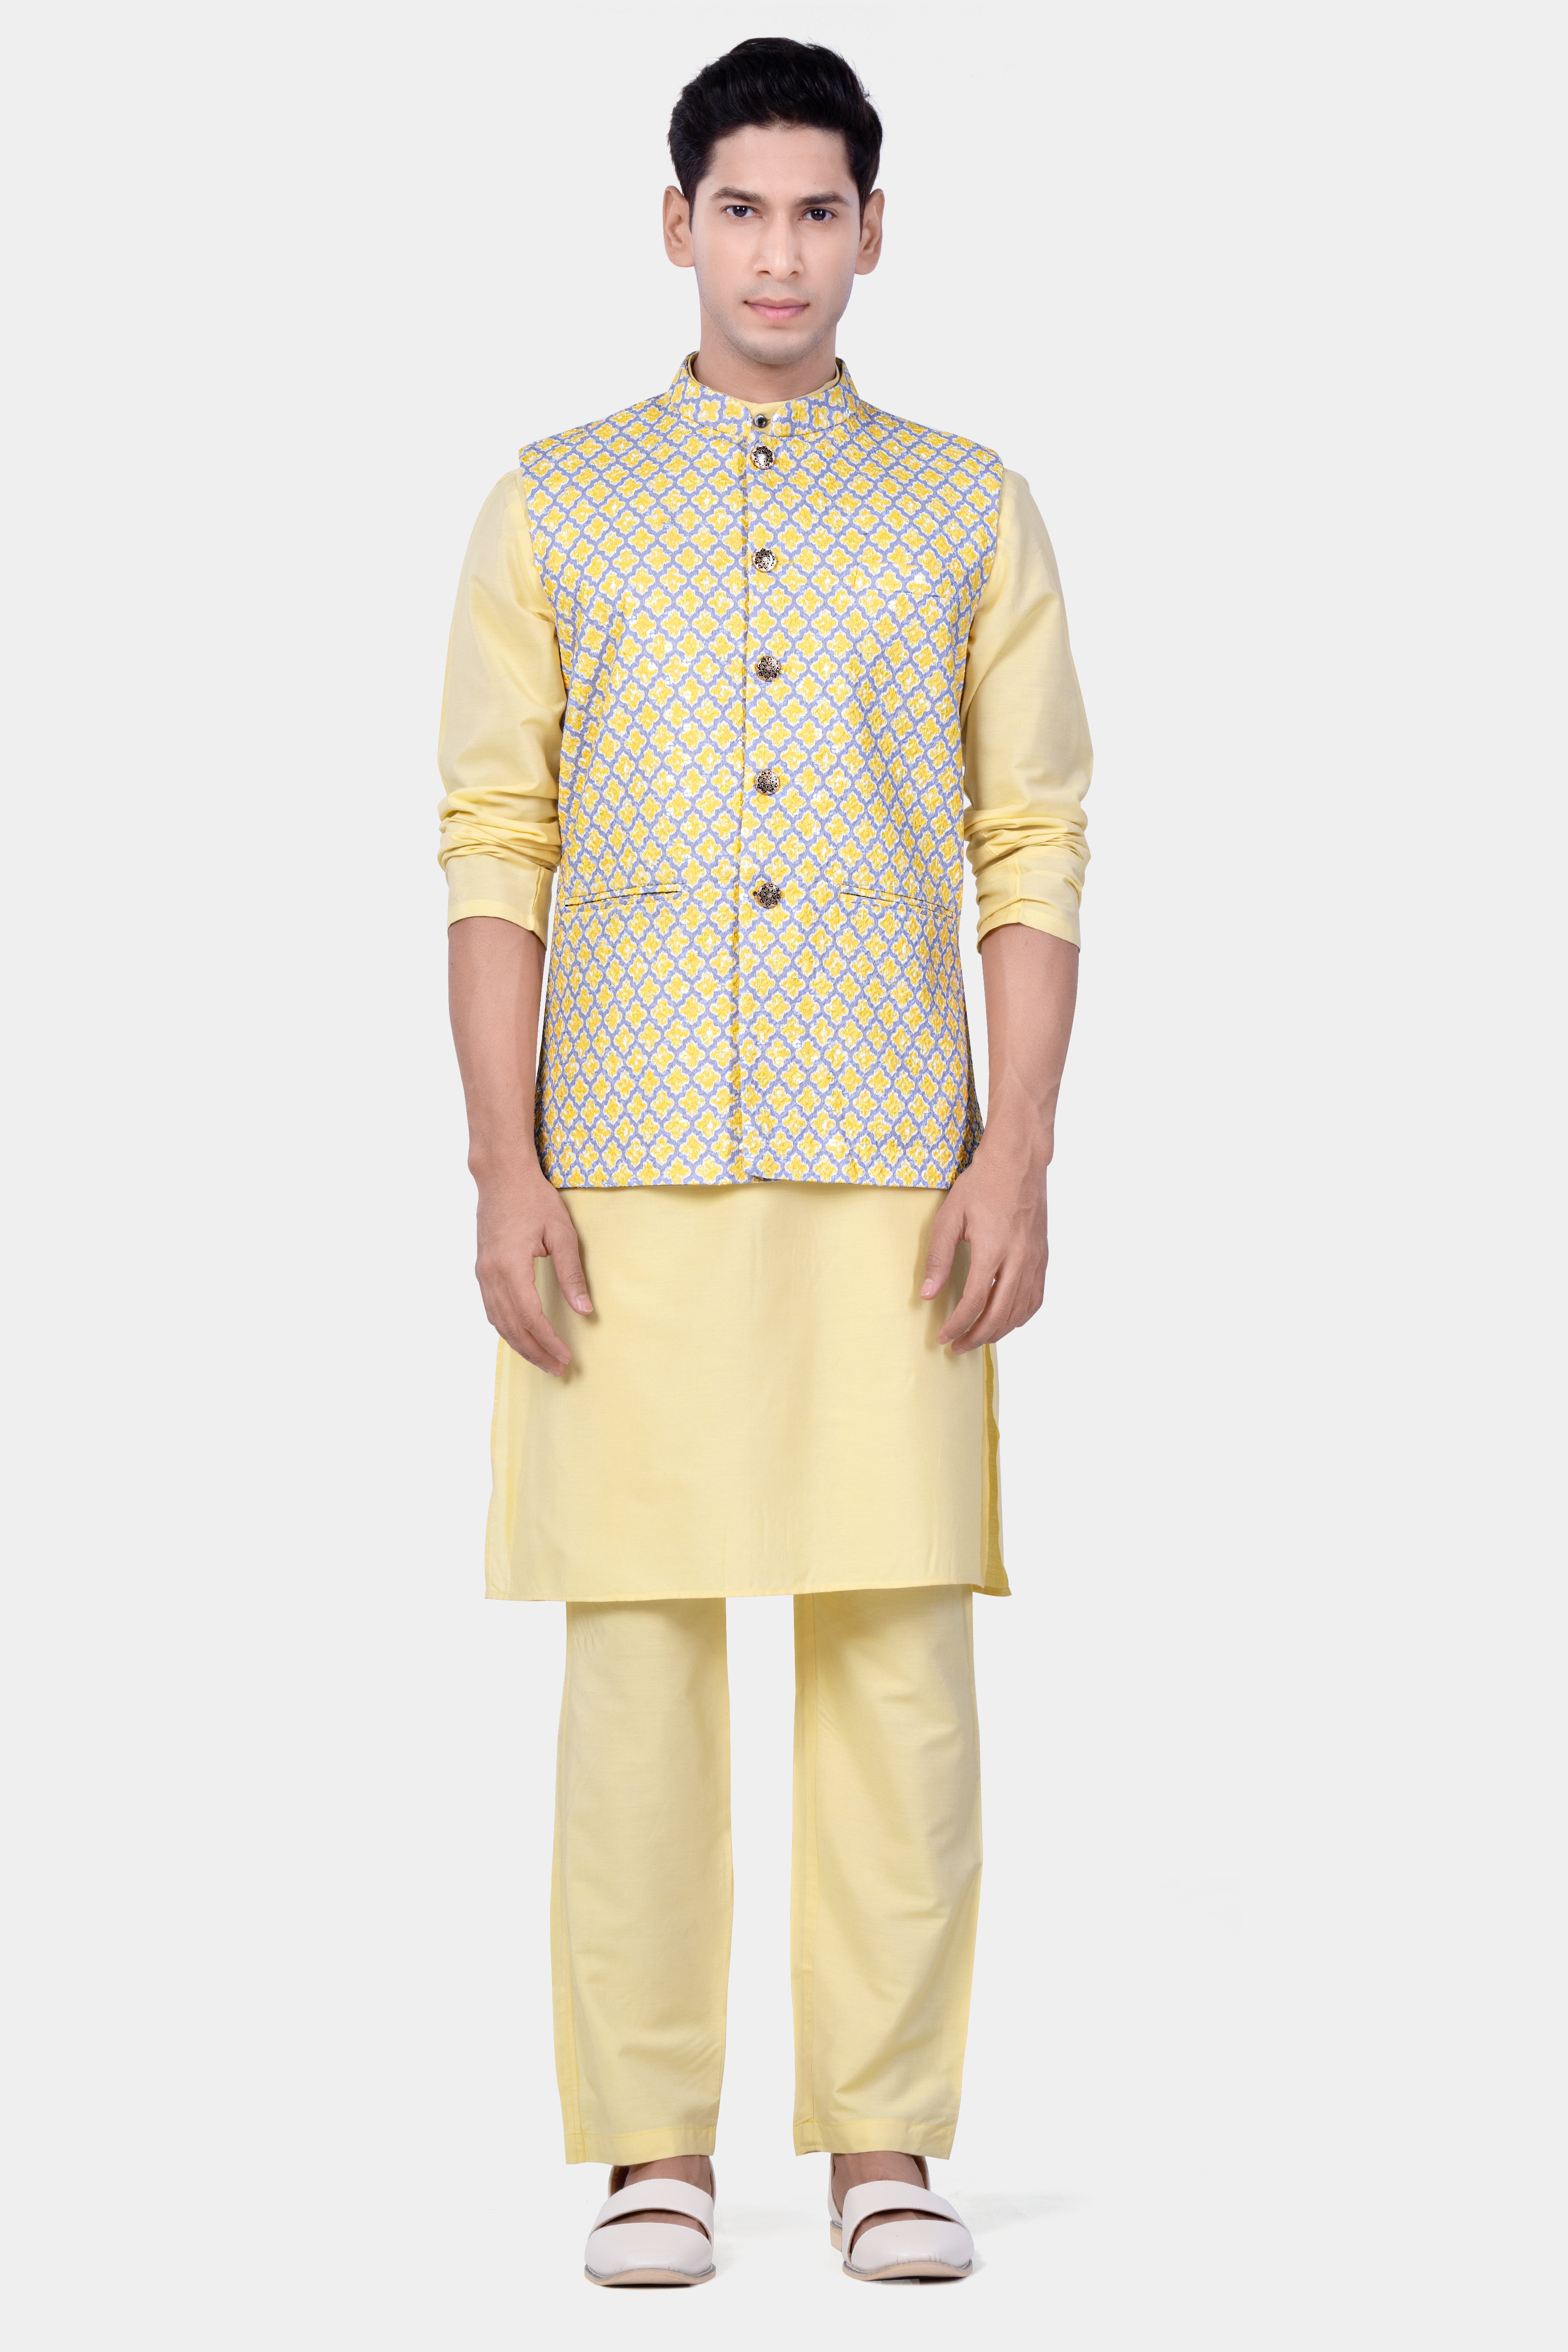 Marzipan Yellow And Casper Gray Thread Embroidered Nehru Jacket